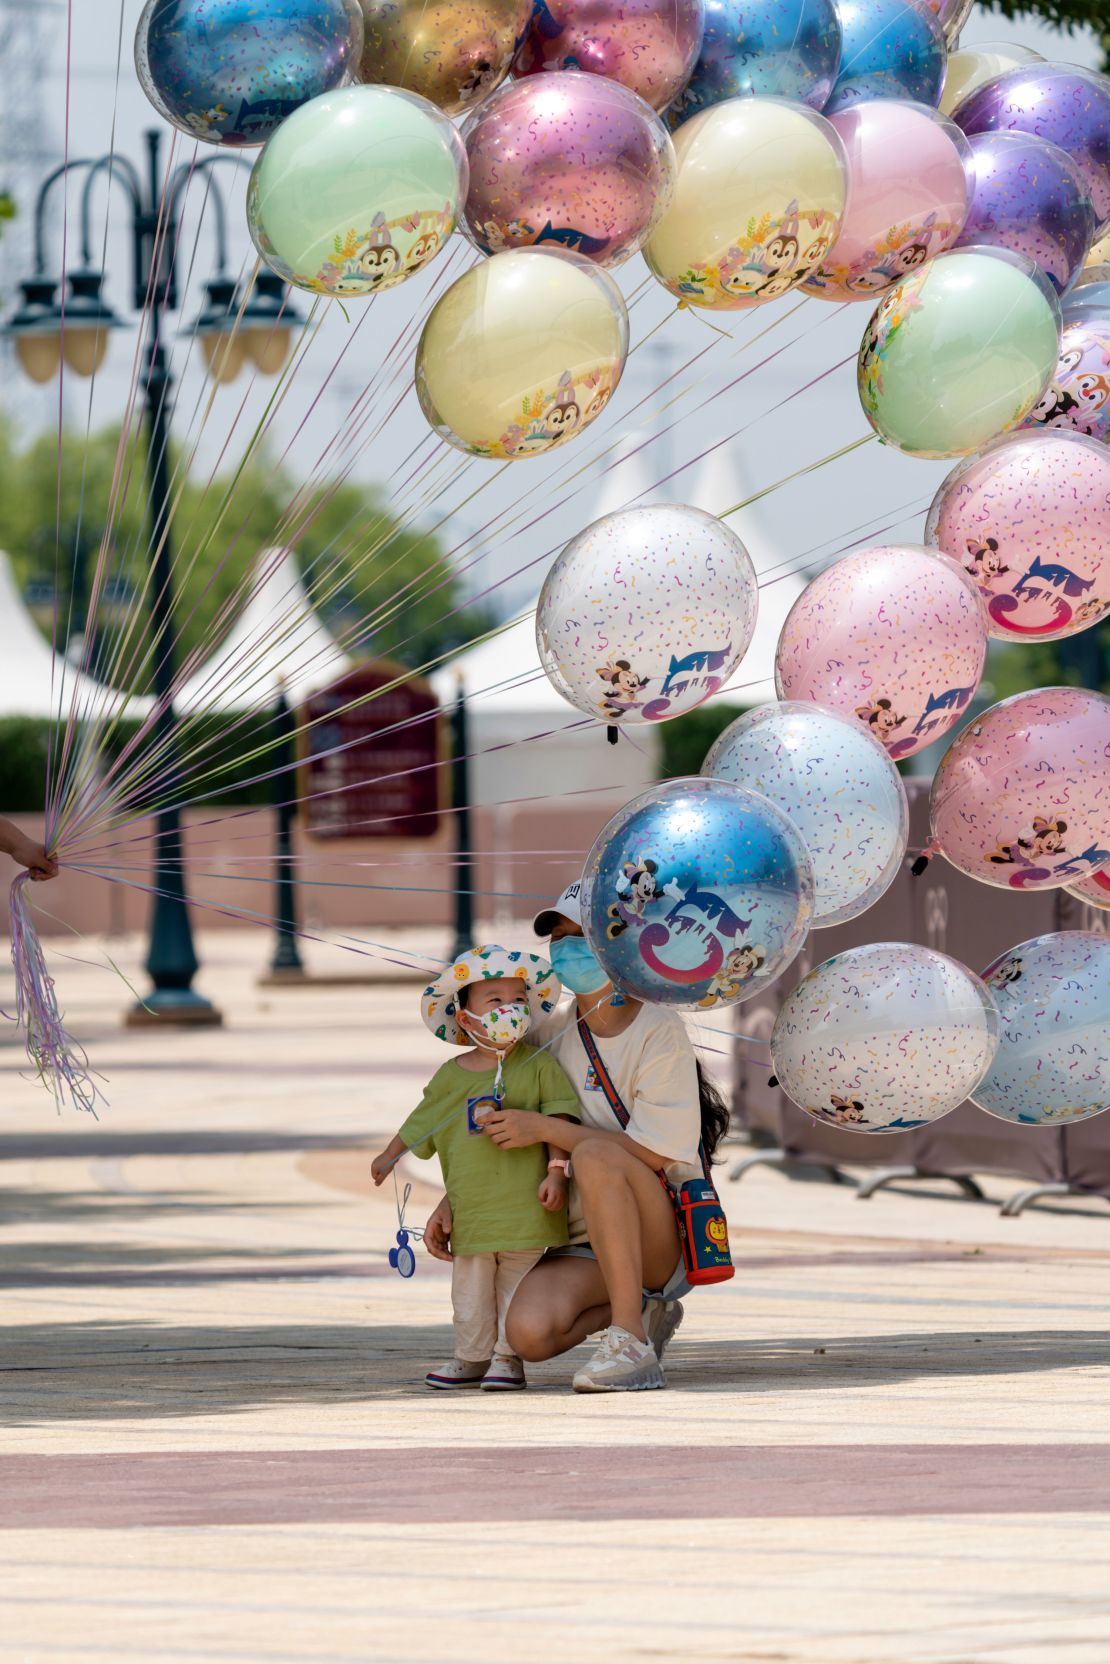 A child looks at balloons at the Shanghai Disneytown on June 16, 2022 in Shanghai, China.